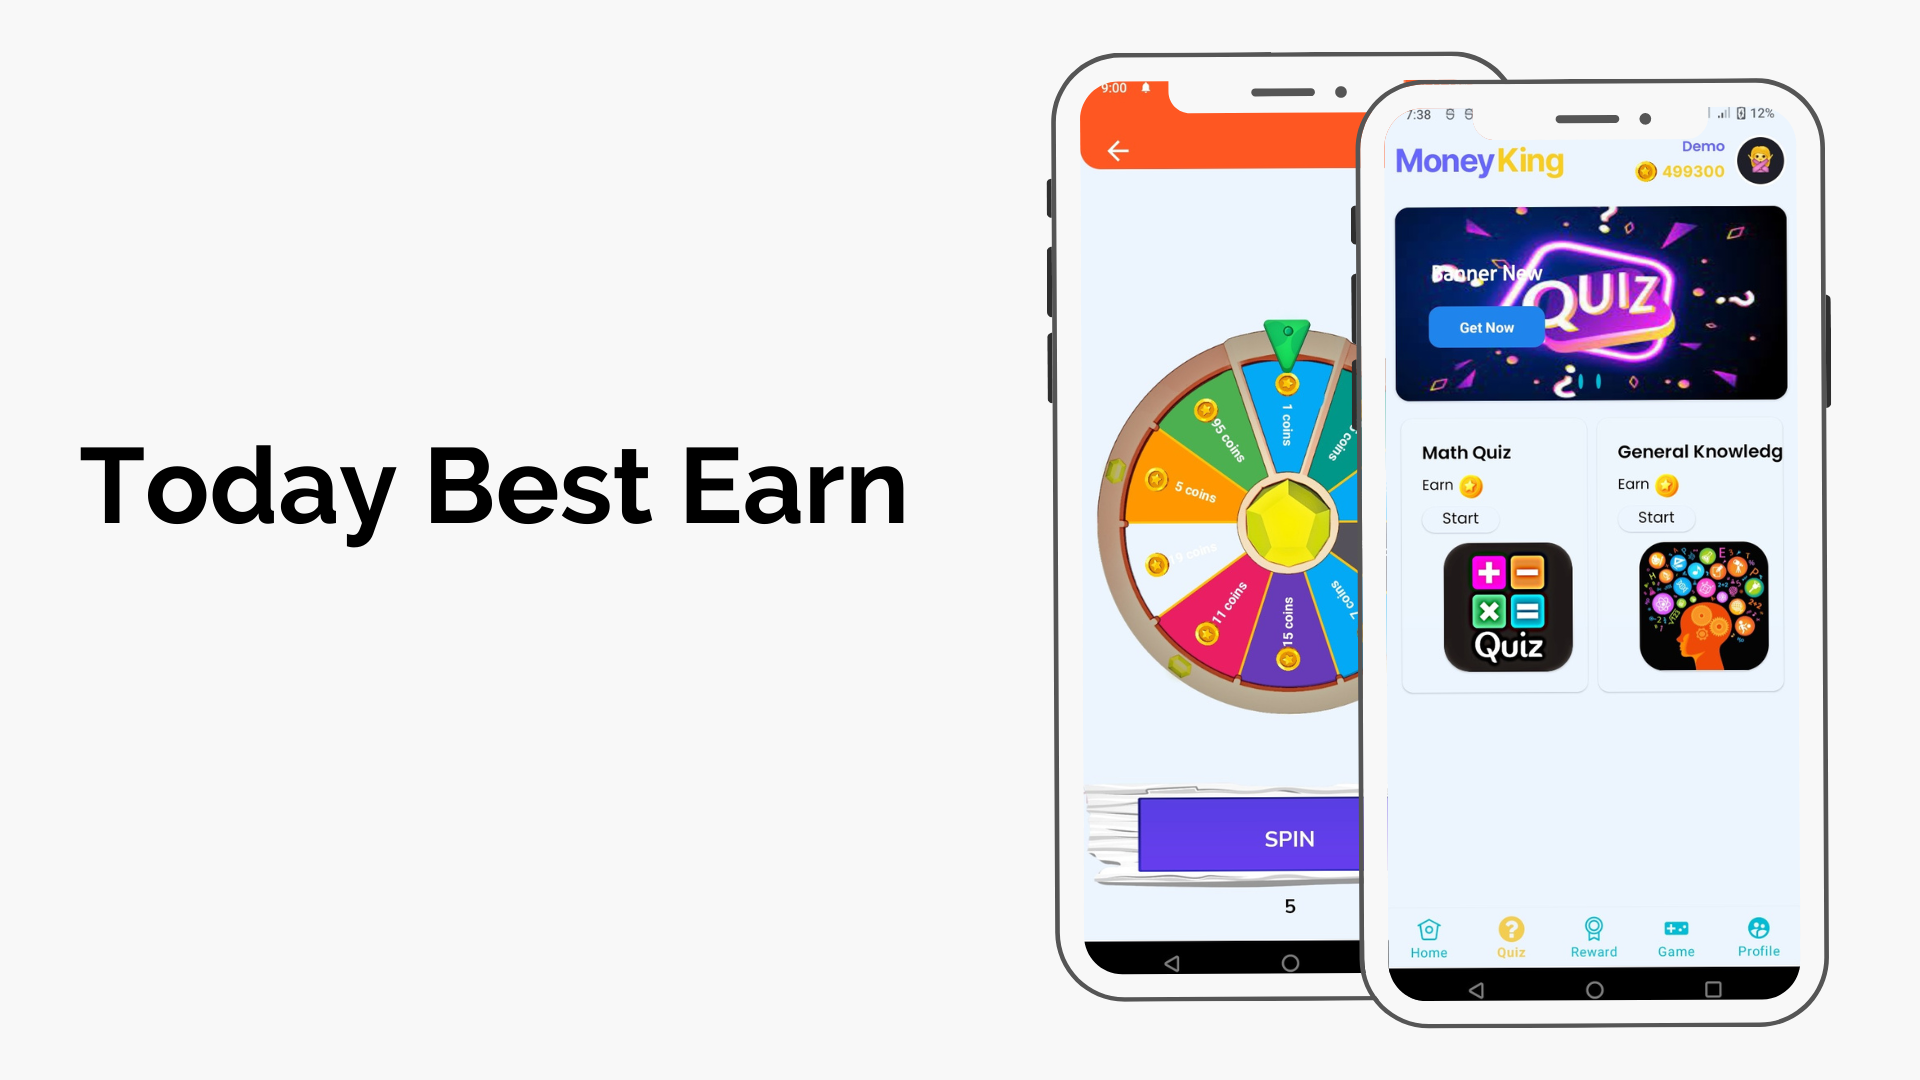 Money King - Android Rewards Earning App With Admin Panel - 6